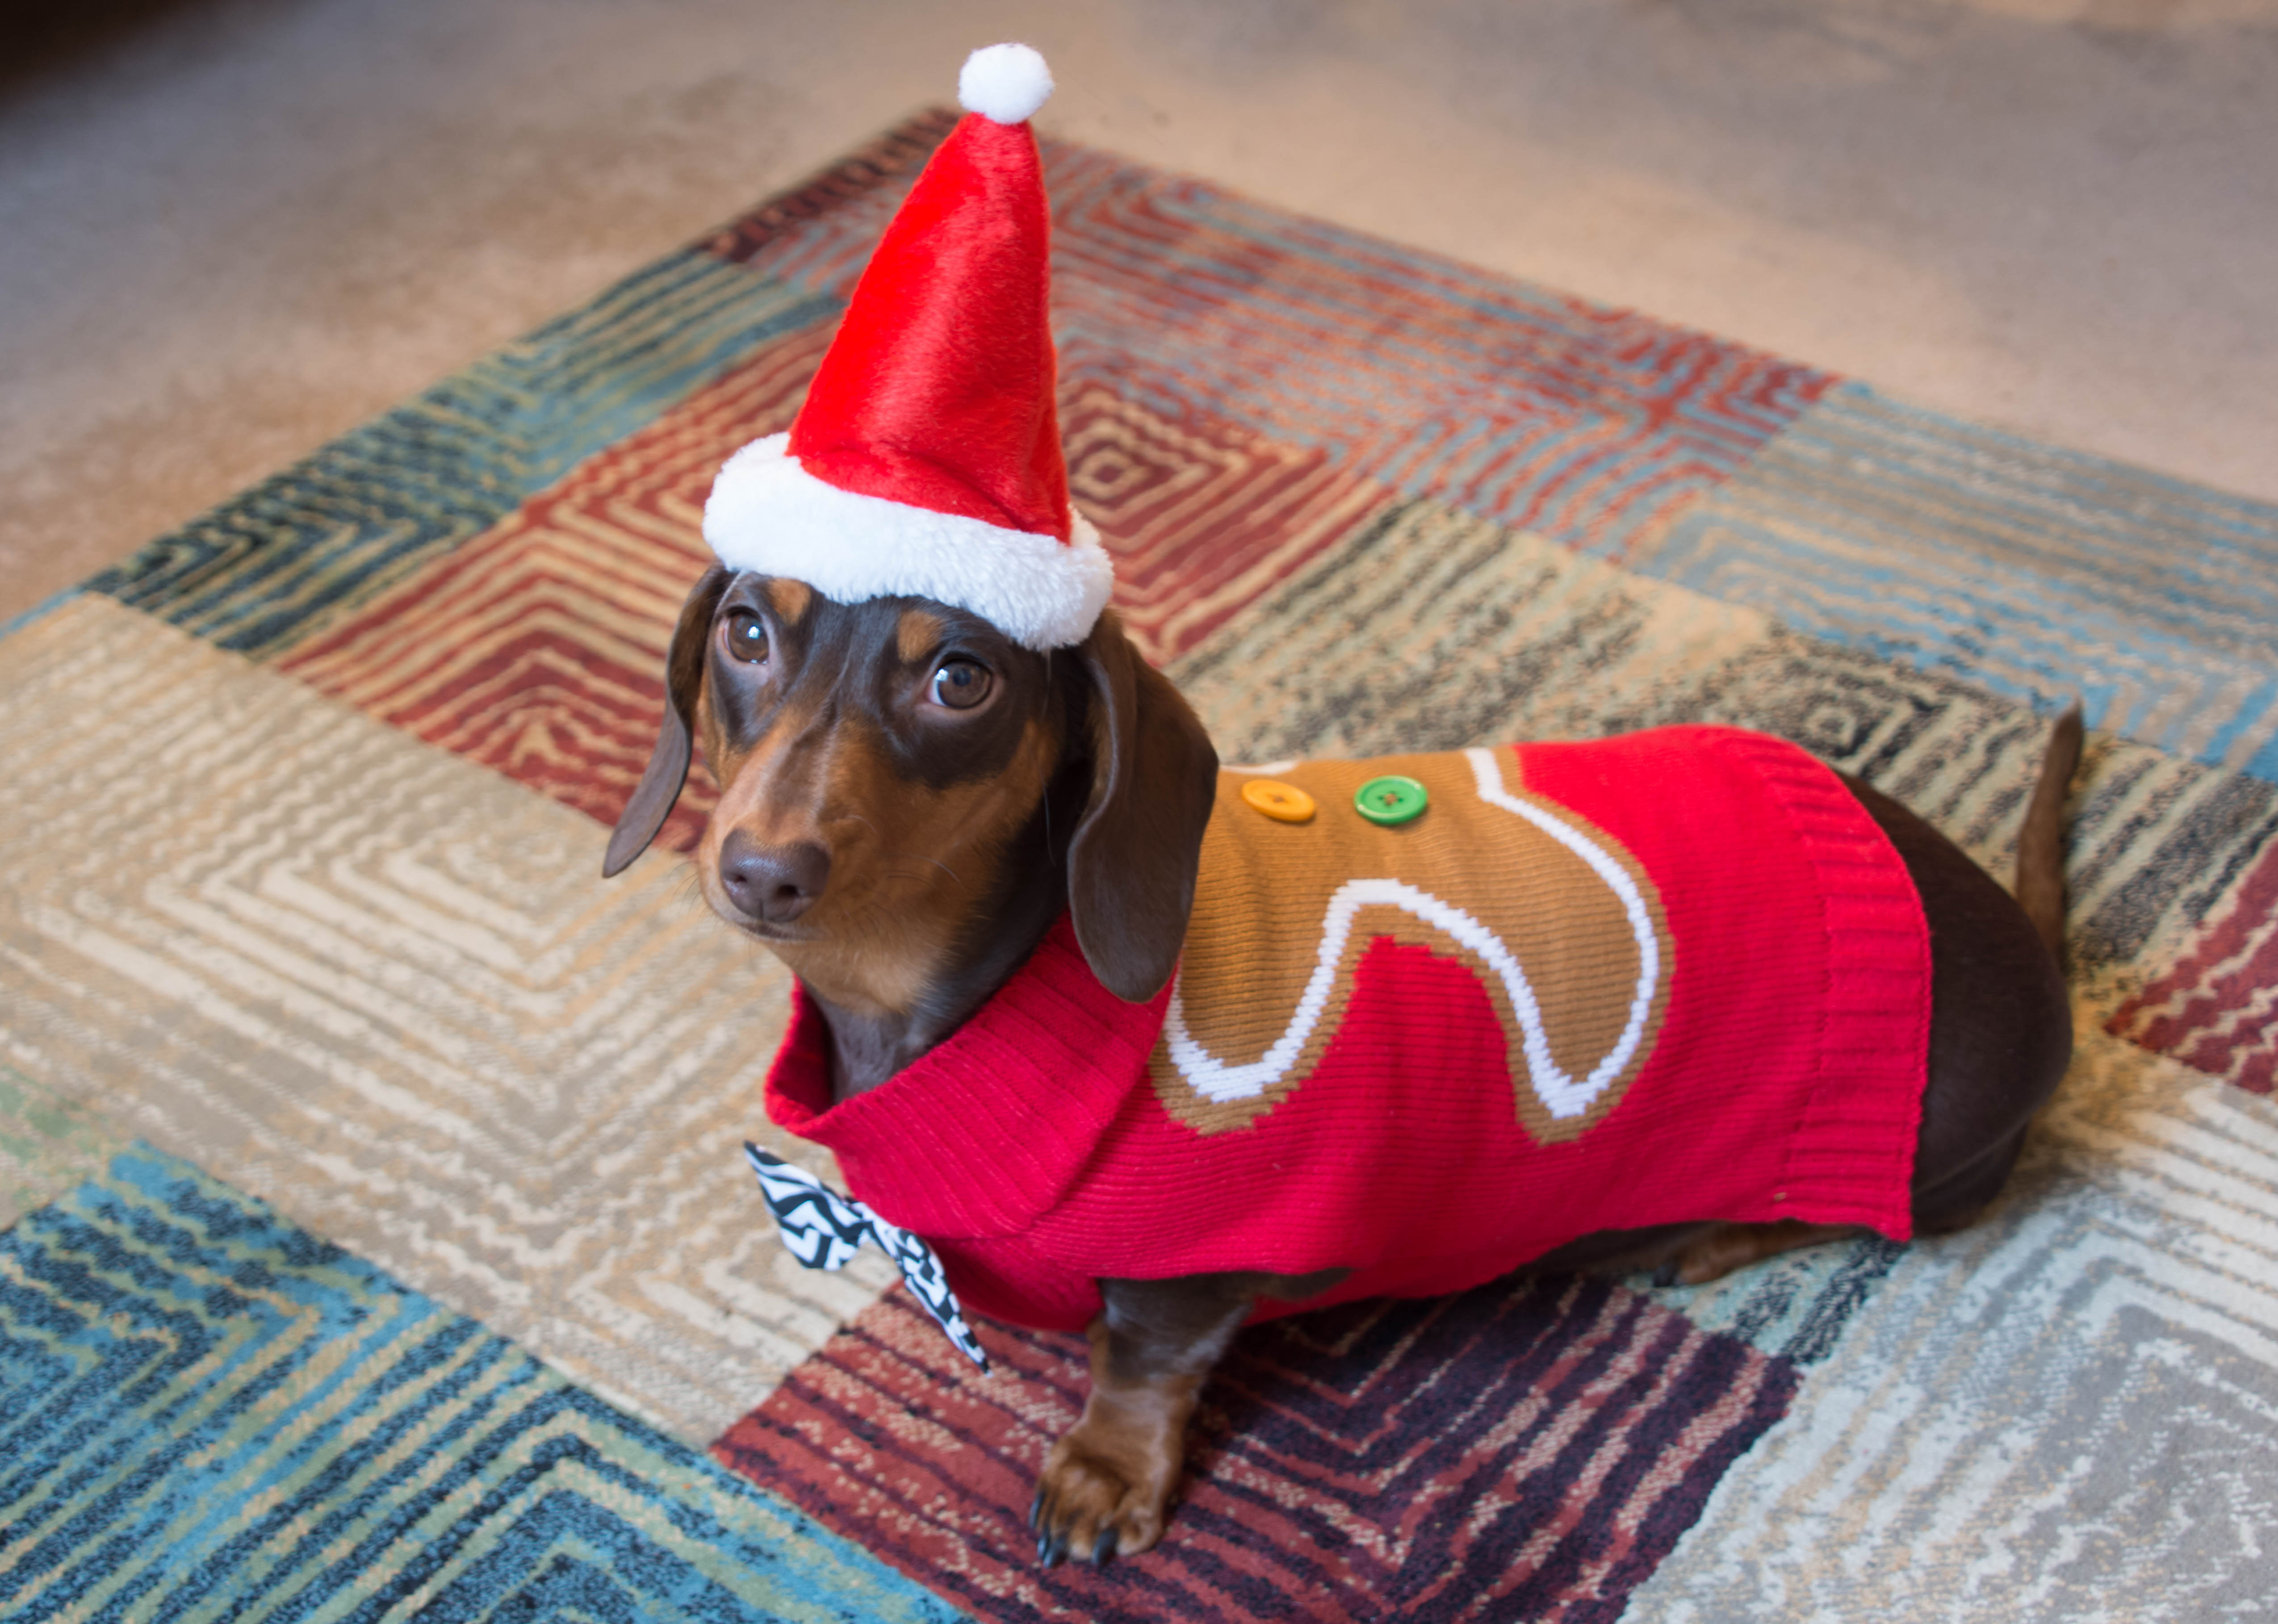 Your Pup Needs One of These Adorable Christmas Sweaters from